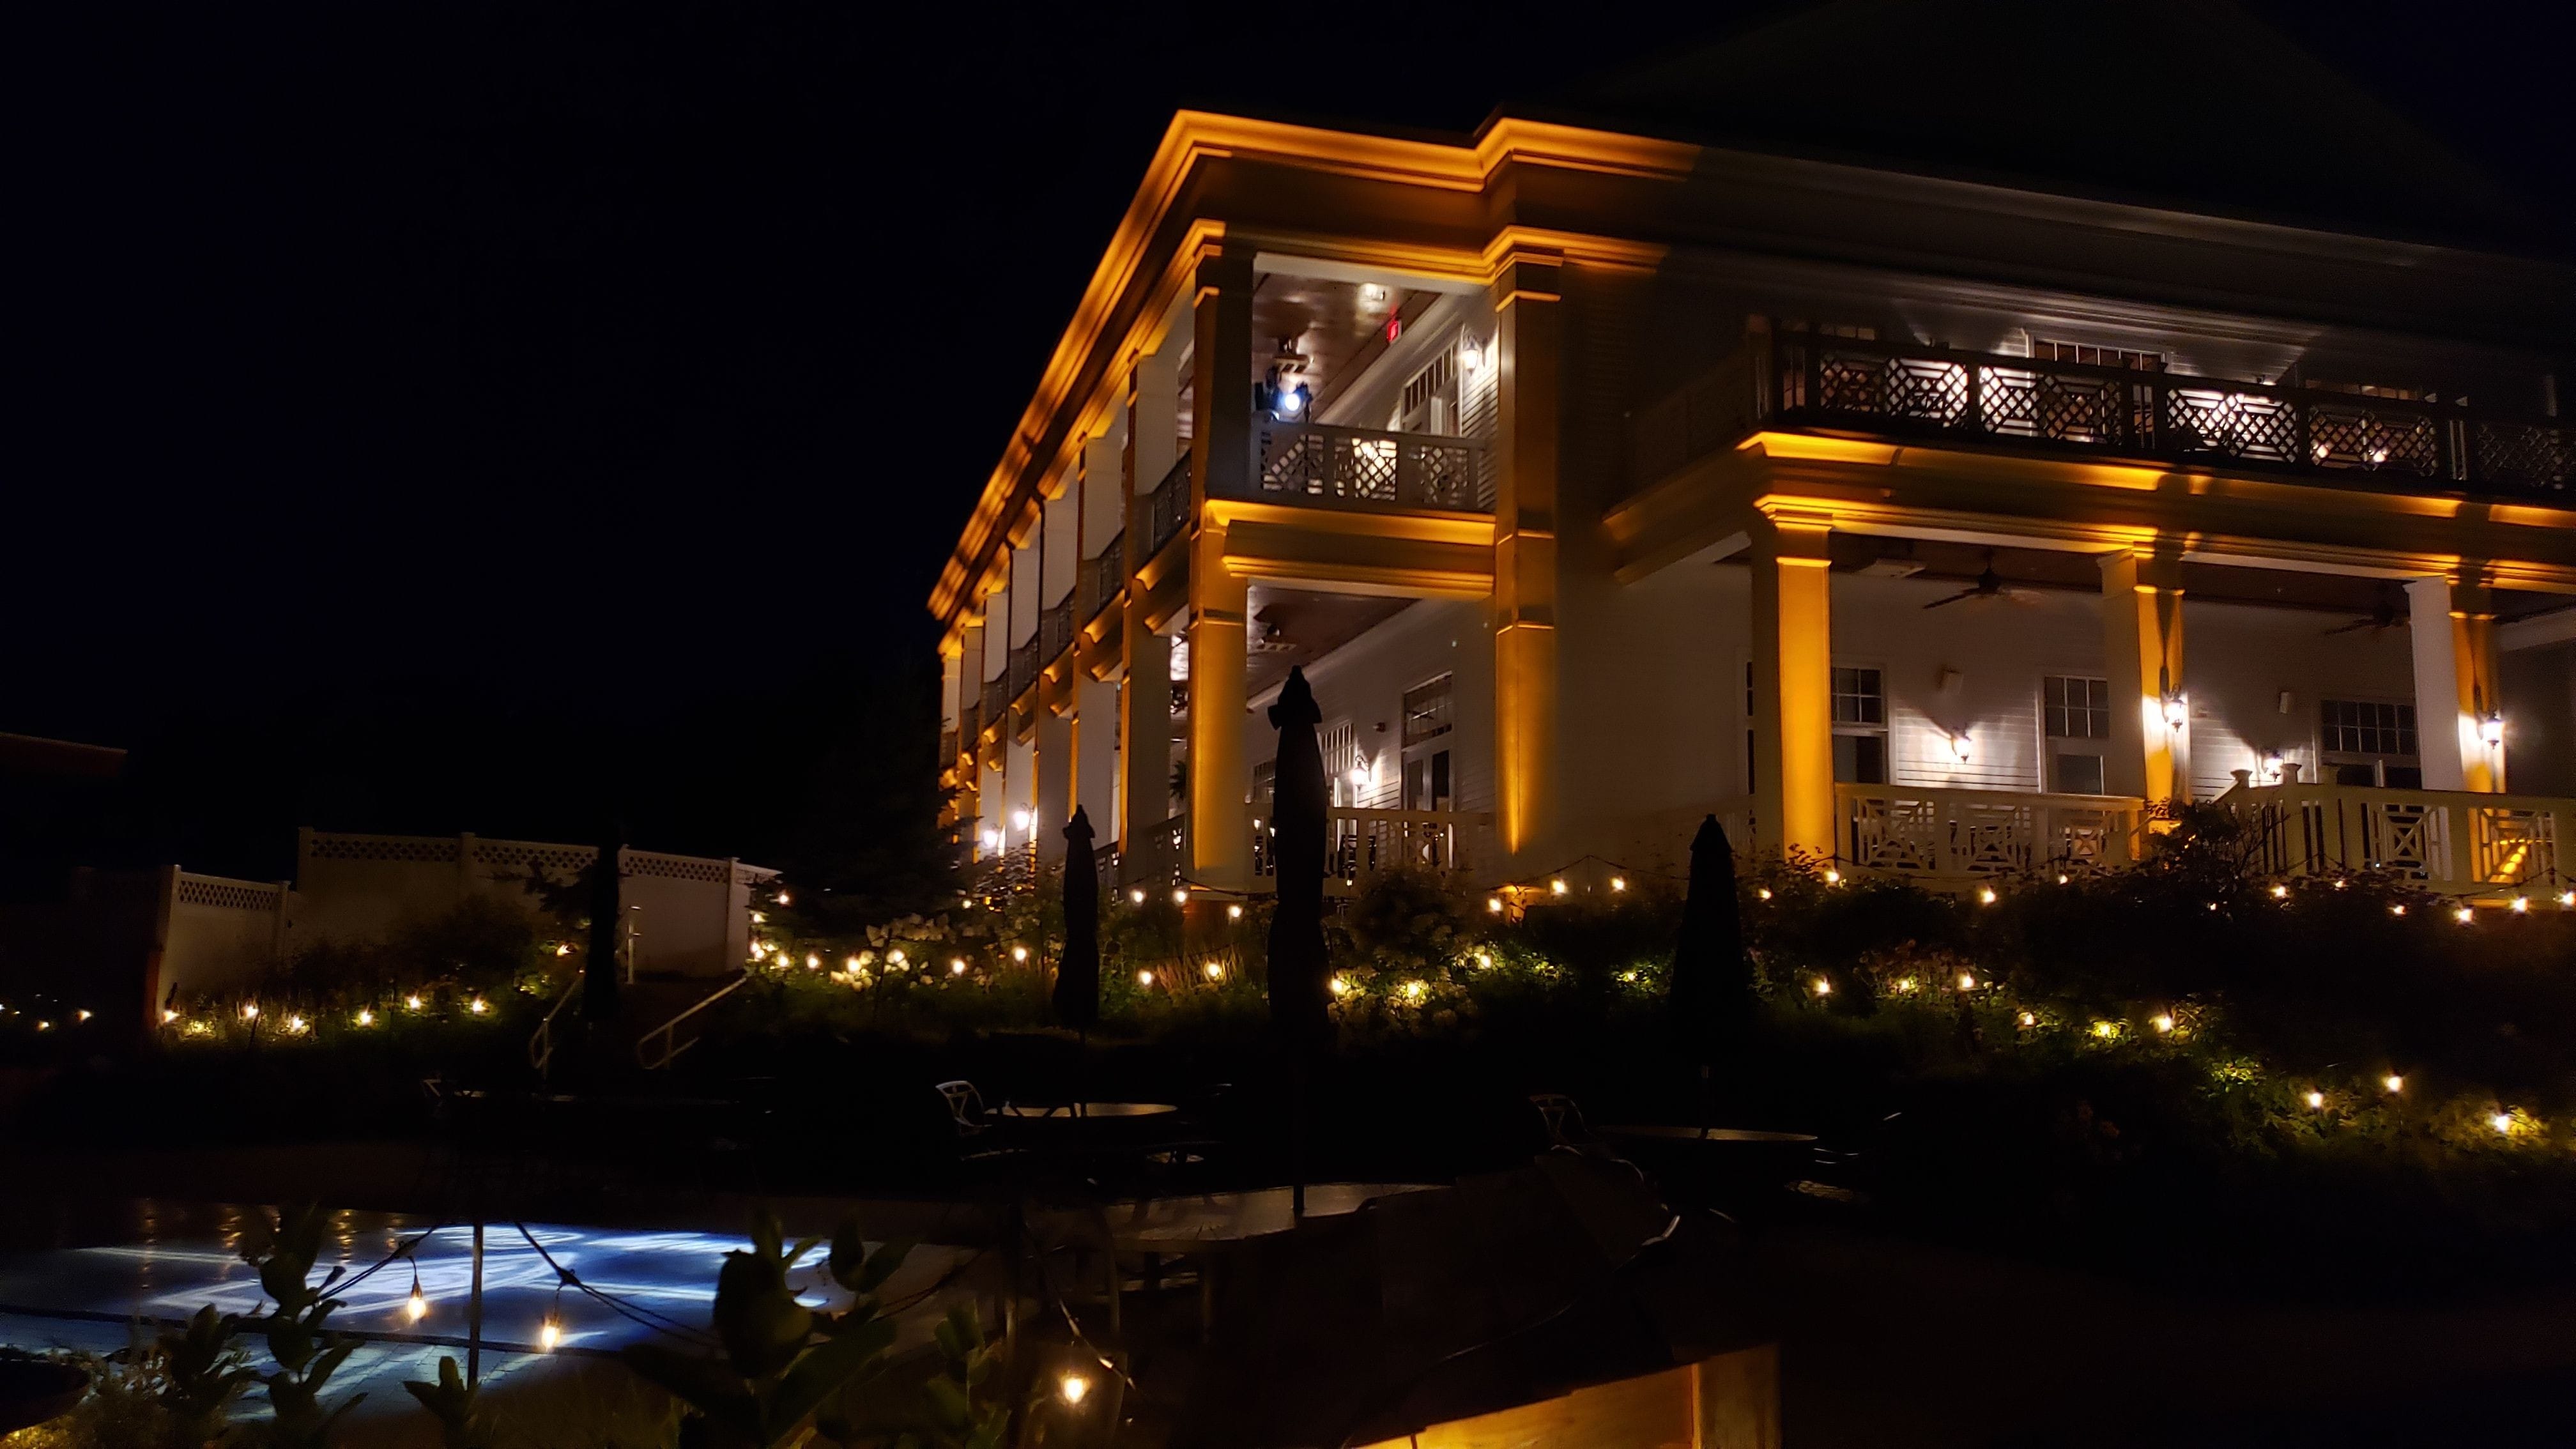 The Northland Country Club lit in amber with garden bistro.